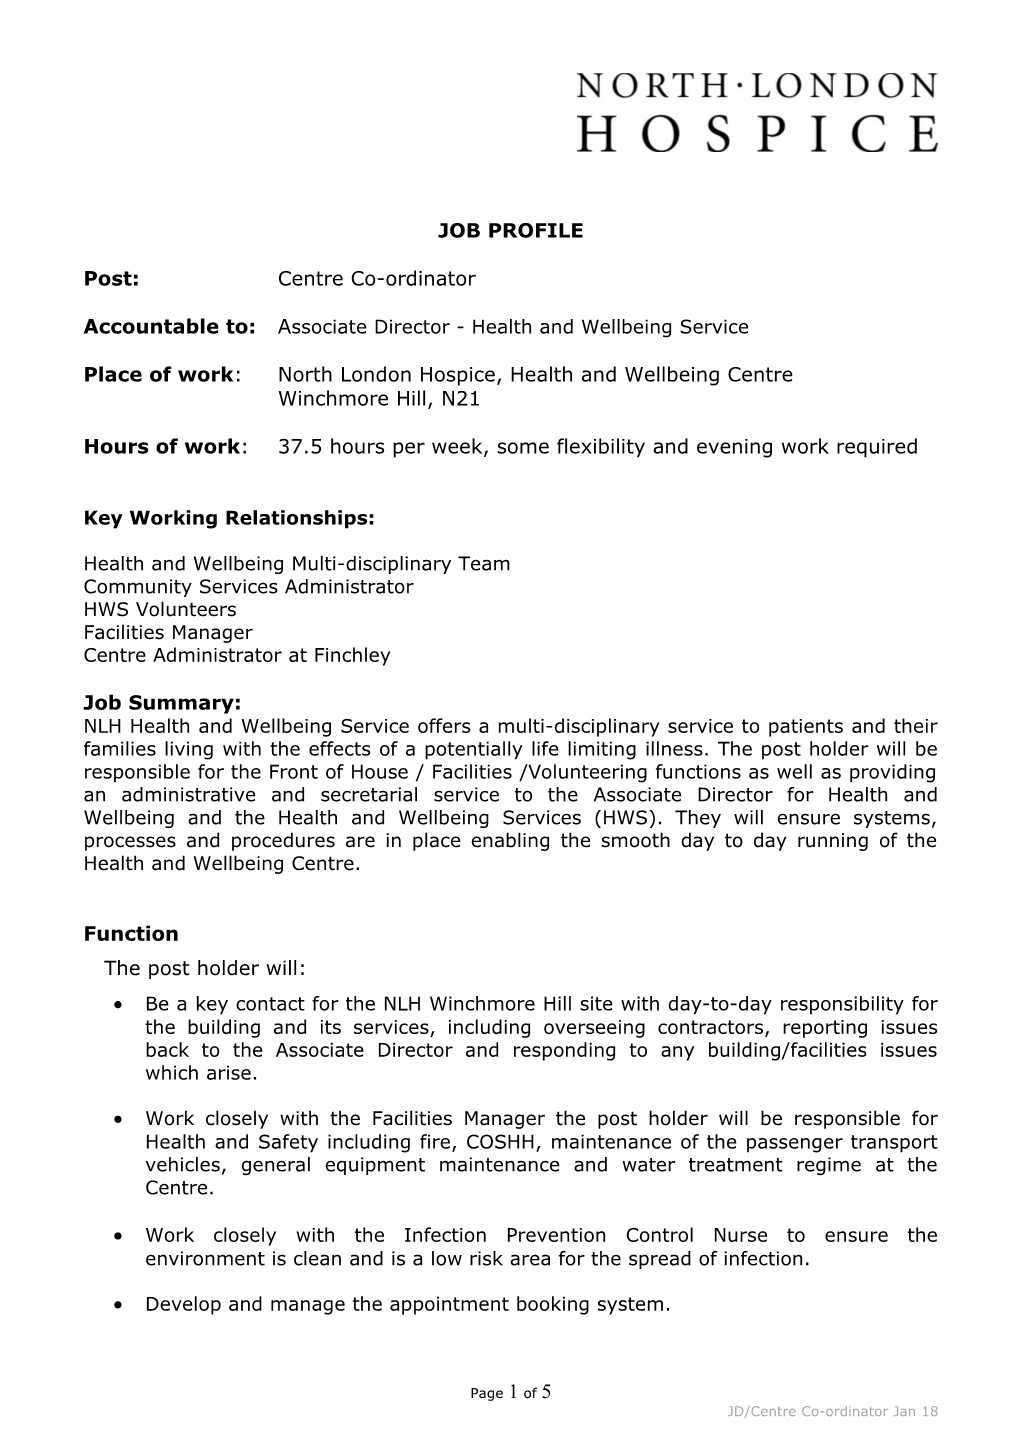 Accountable To:Associate Director - Health and Wellbeing Service